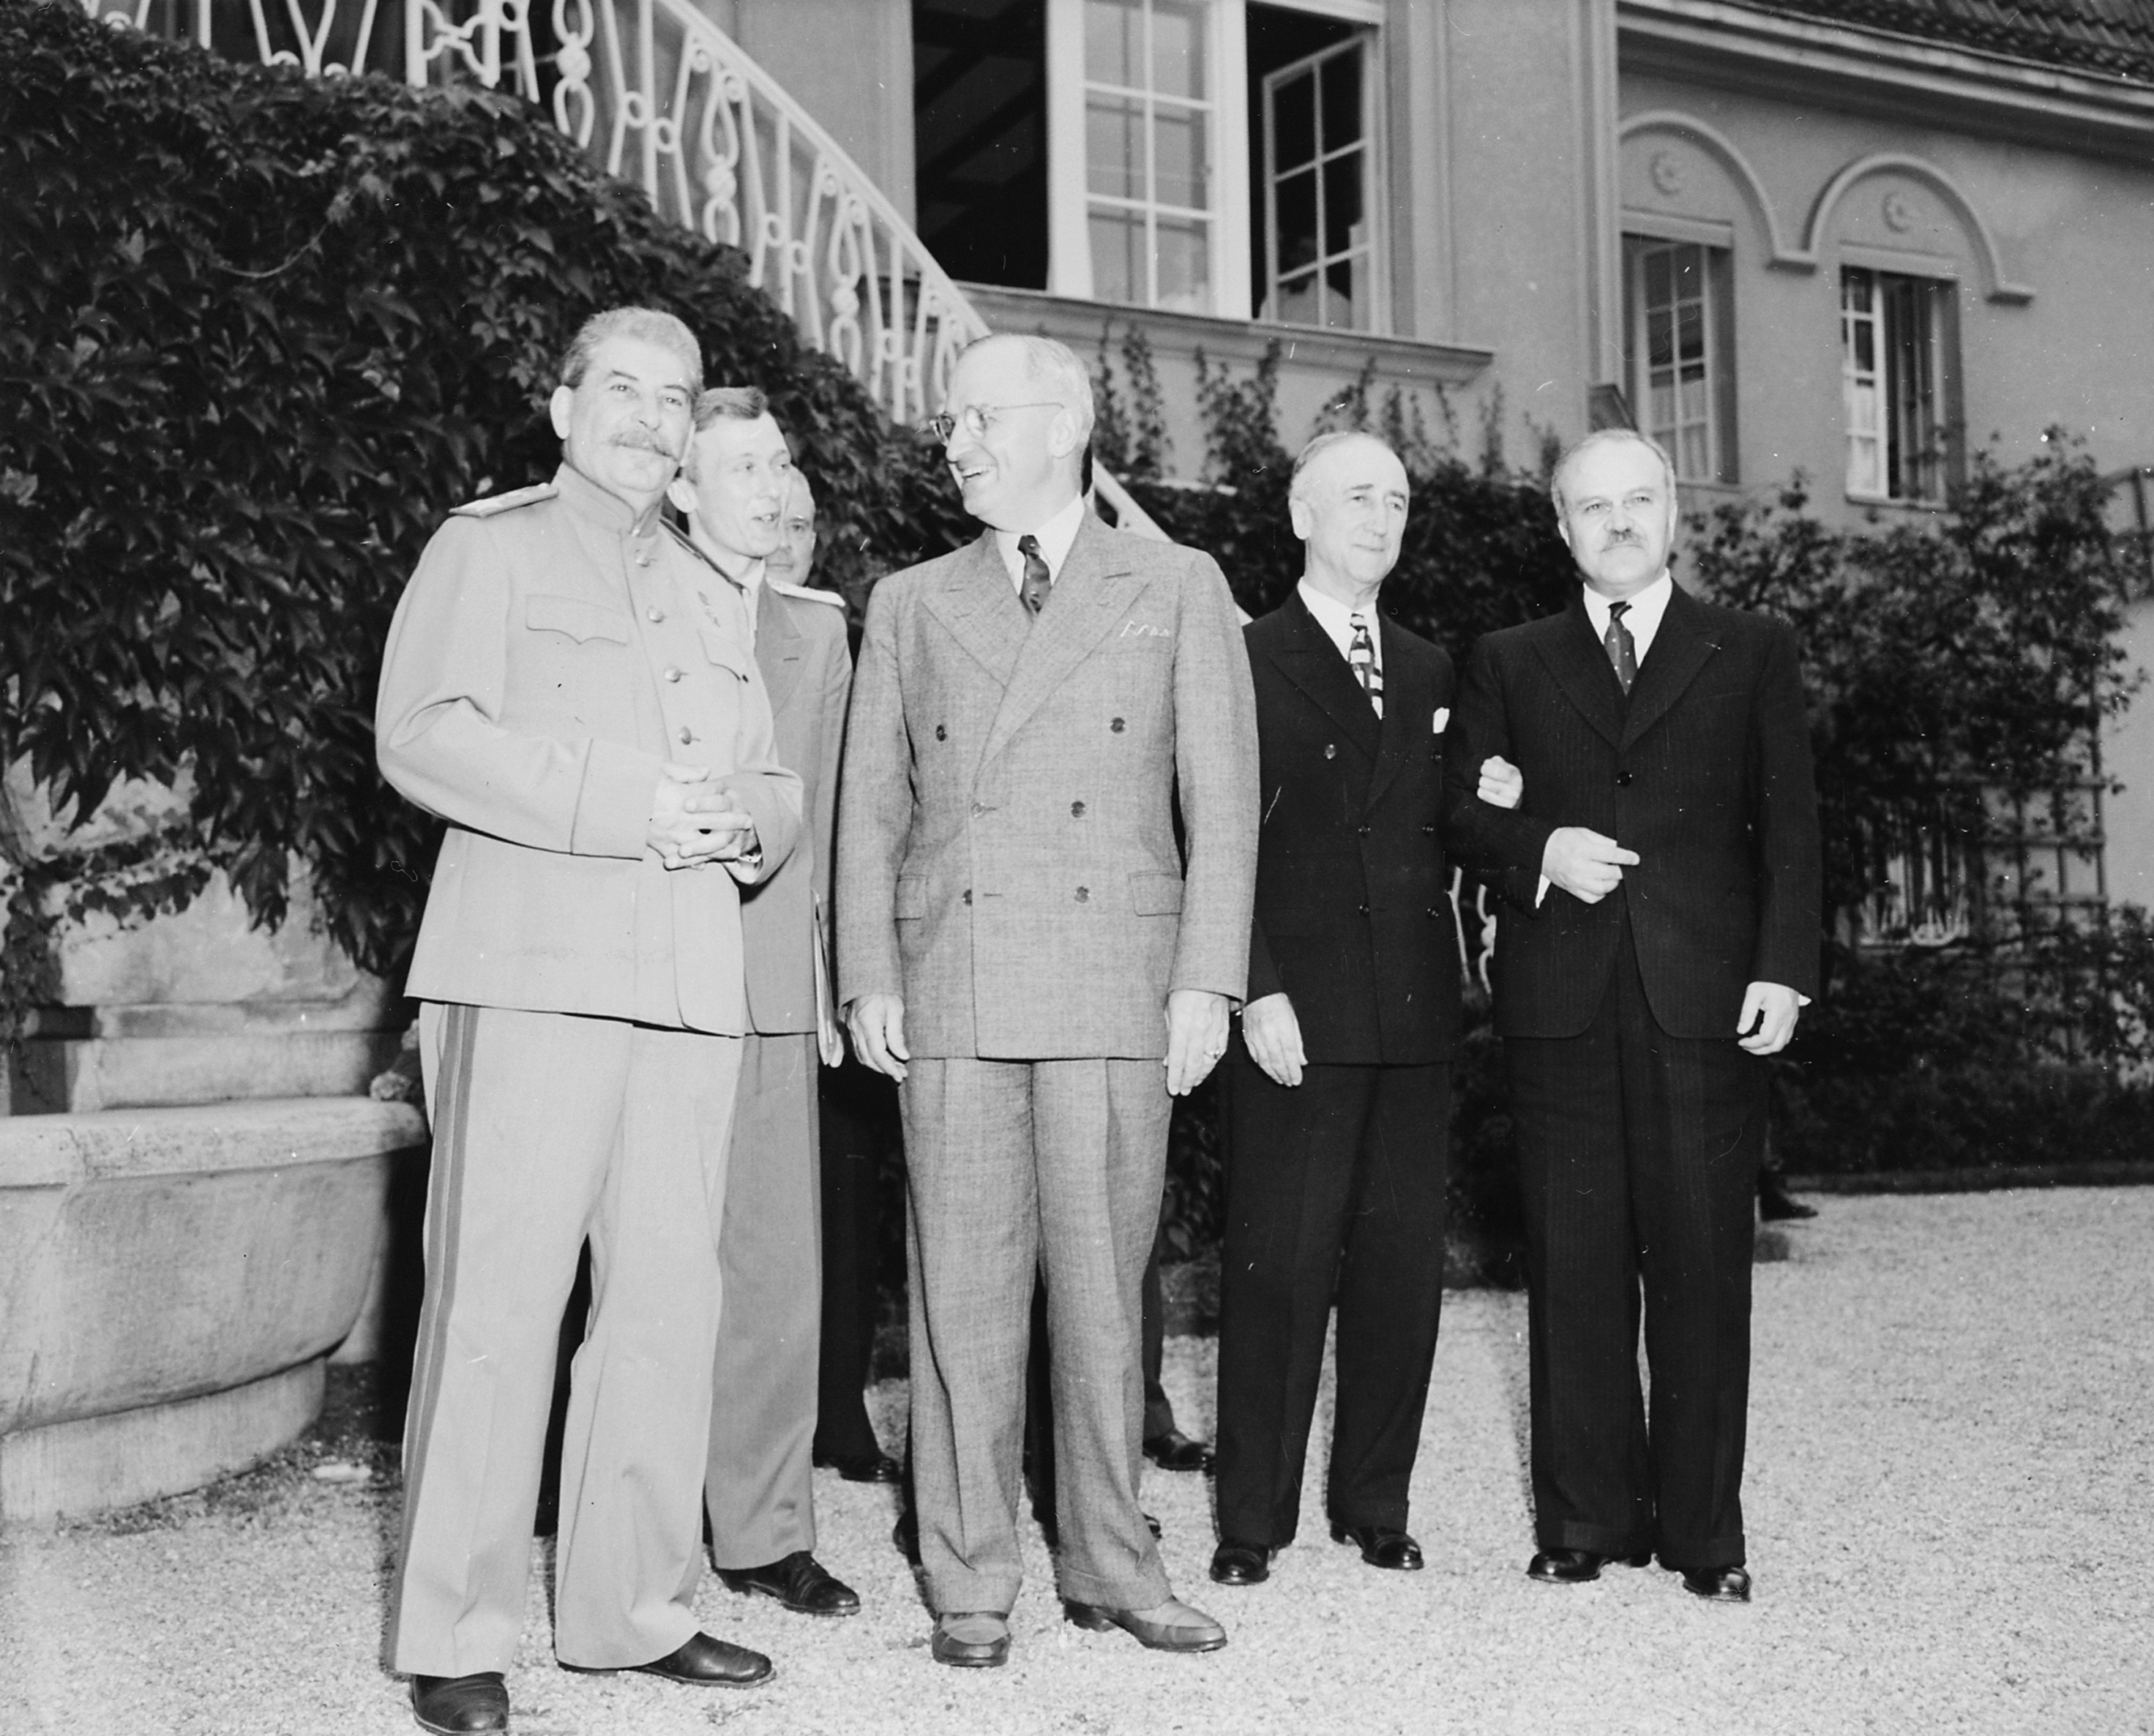 Joseph Stalin, Harry Truman, James Byrnes, and Vyacheslav Molotov at Stalin's residence during the Potsdam Conference, 18 Jul 1945, photo 2 of 2